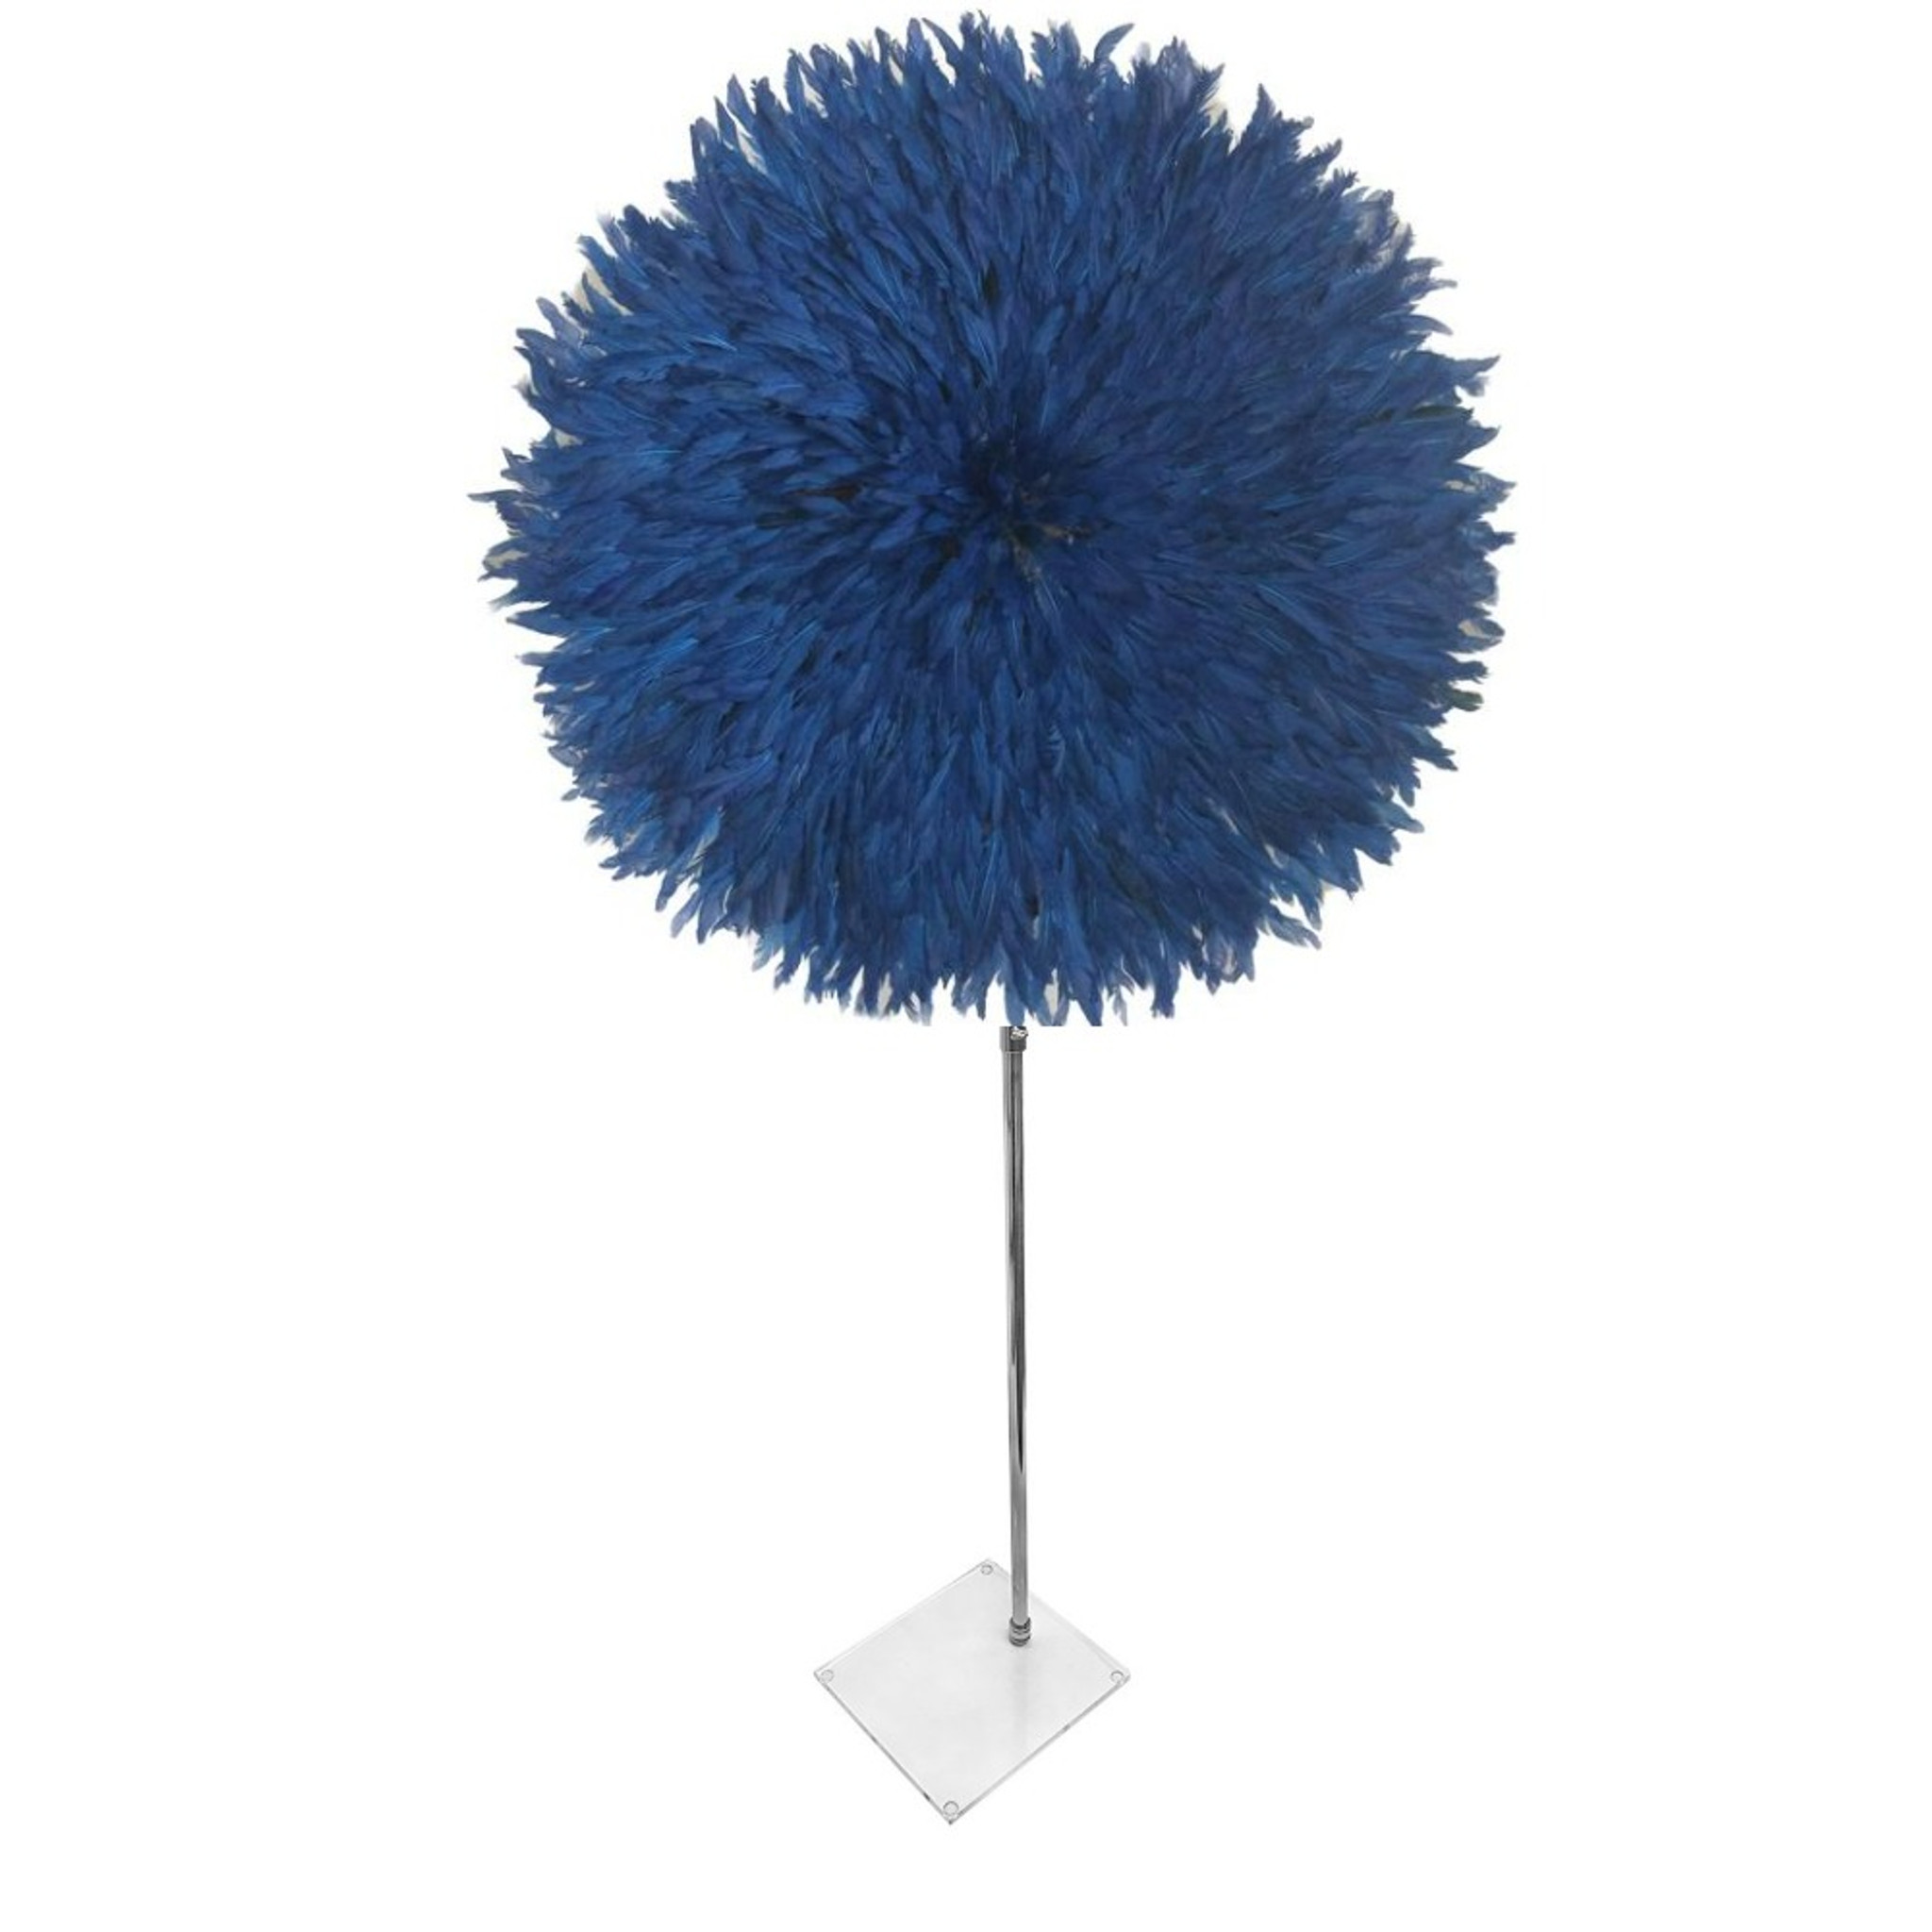 bright color juju hat feathers african round wall clear lucite acrylic decorative tabletop accessory sculpture